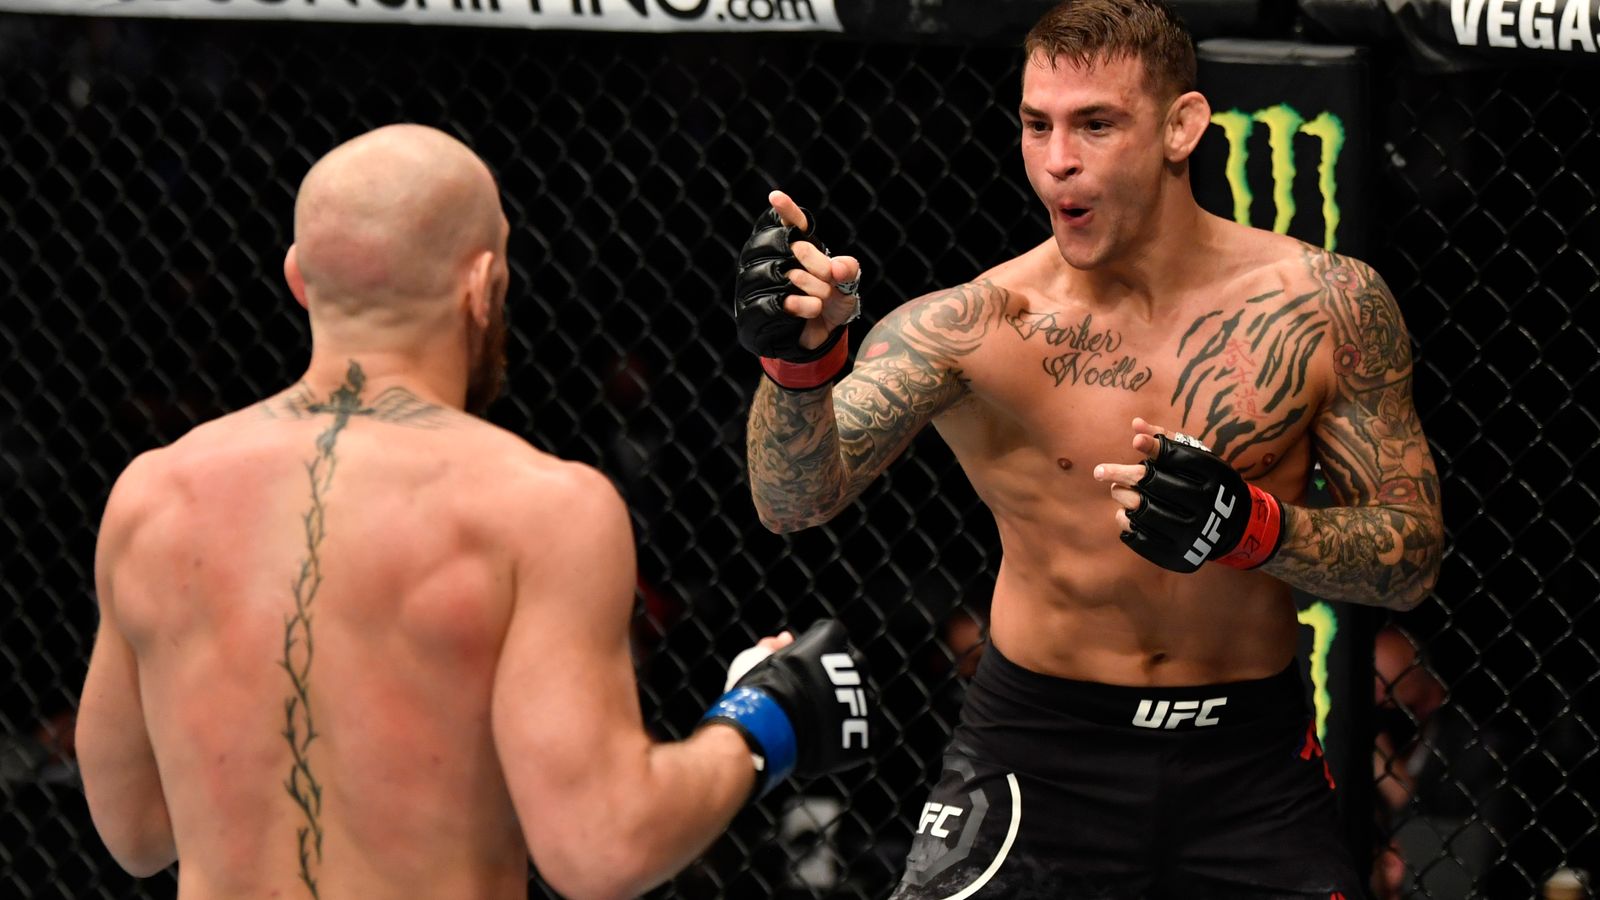 Conor McGregor beaten by Dustin Poirier at UFC 257 to shatte